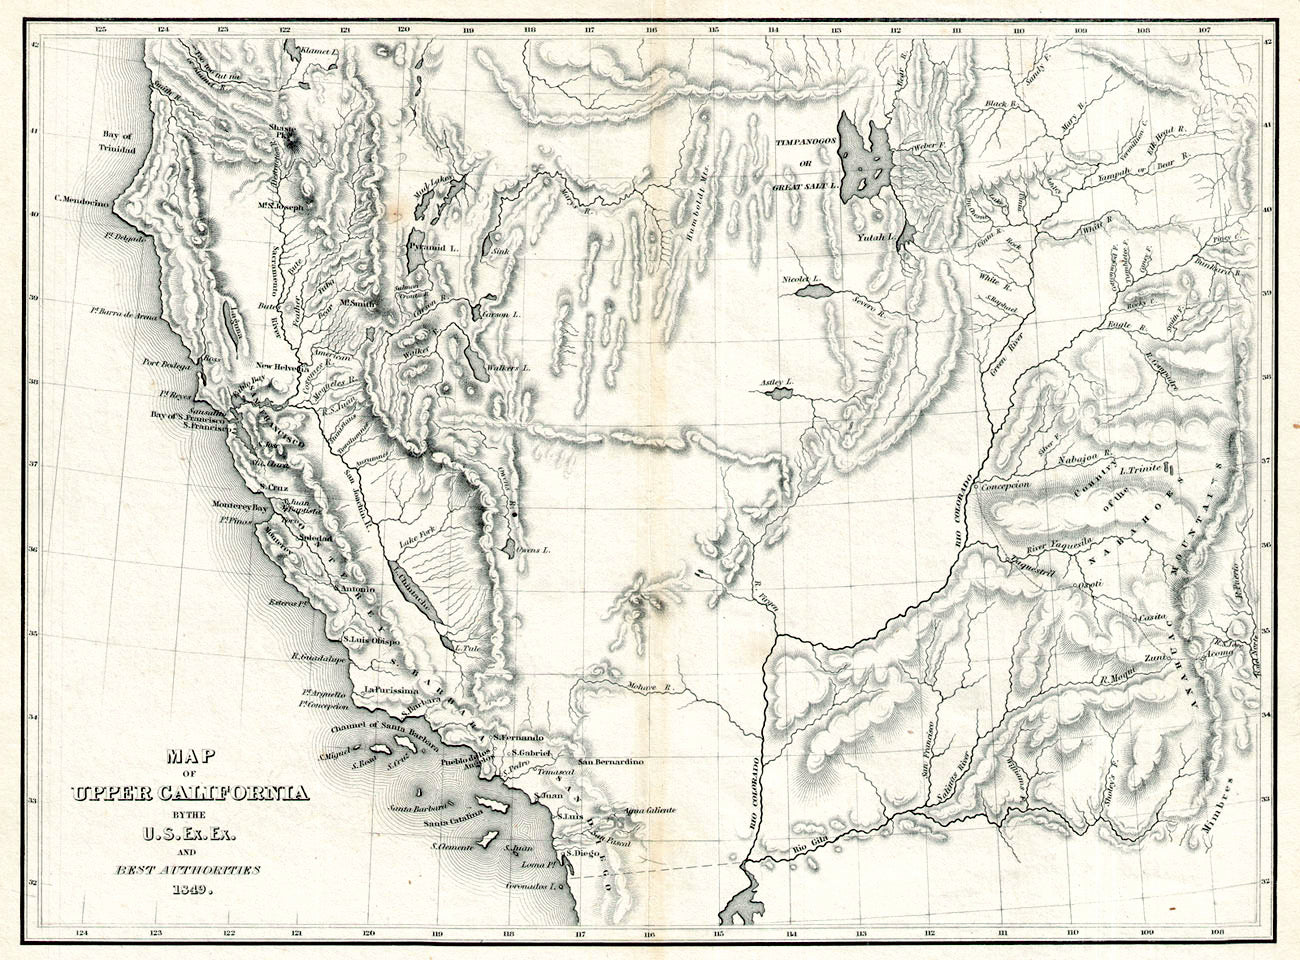 (West) Map Of Upper California By The U.S. Ex. Ex